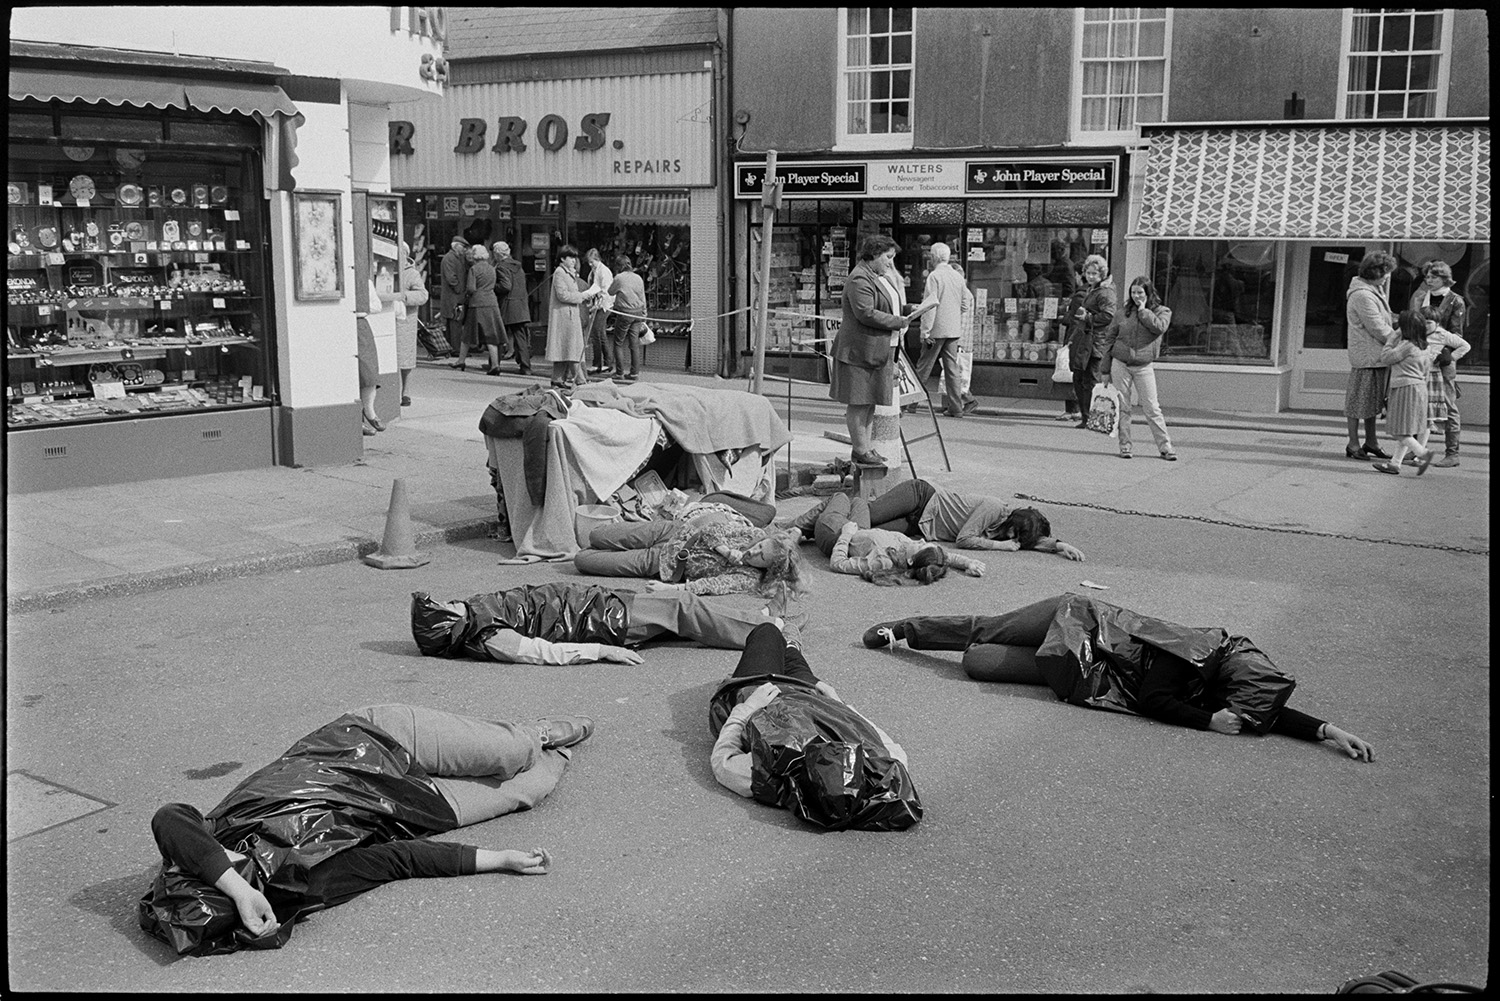 Women's peace movement demonstration, drama and singing songs, photographer. 
[A women's anti-nuclear demonstration in Mill Street, Bideford. The women are lying on the ground, whilst another woman reads from a booklet. Shoppers walking past are looking at the demonstration. The shop front of Walter's Newsagent is visible on the opposite side of the street.]